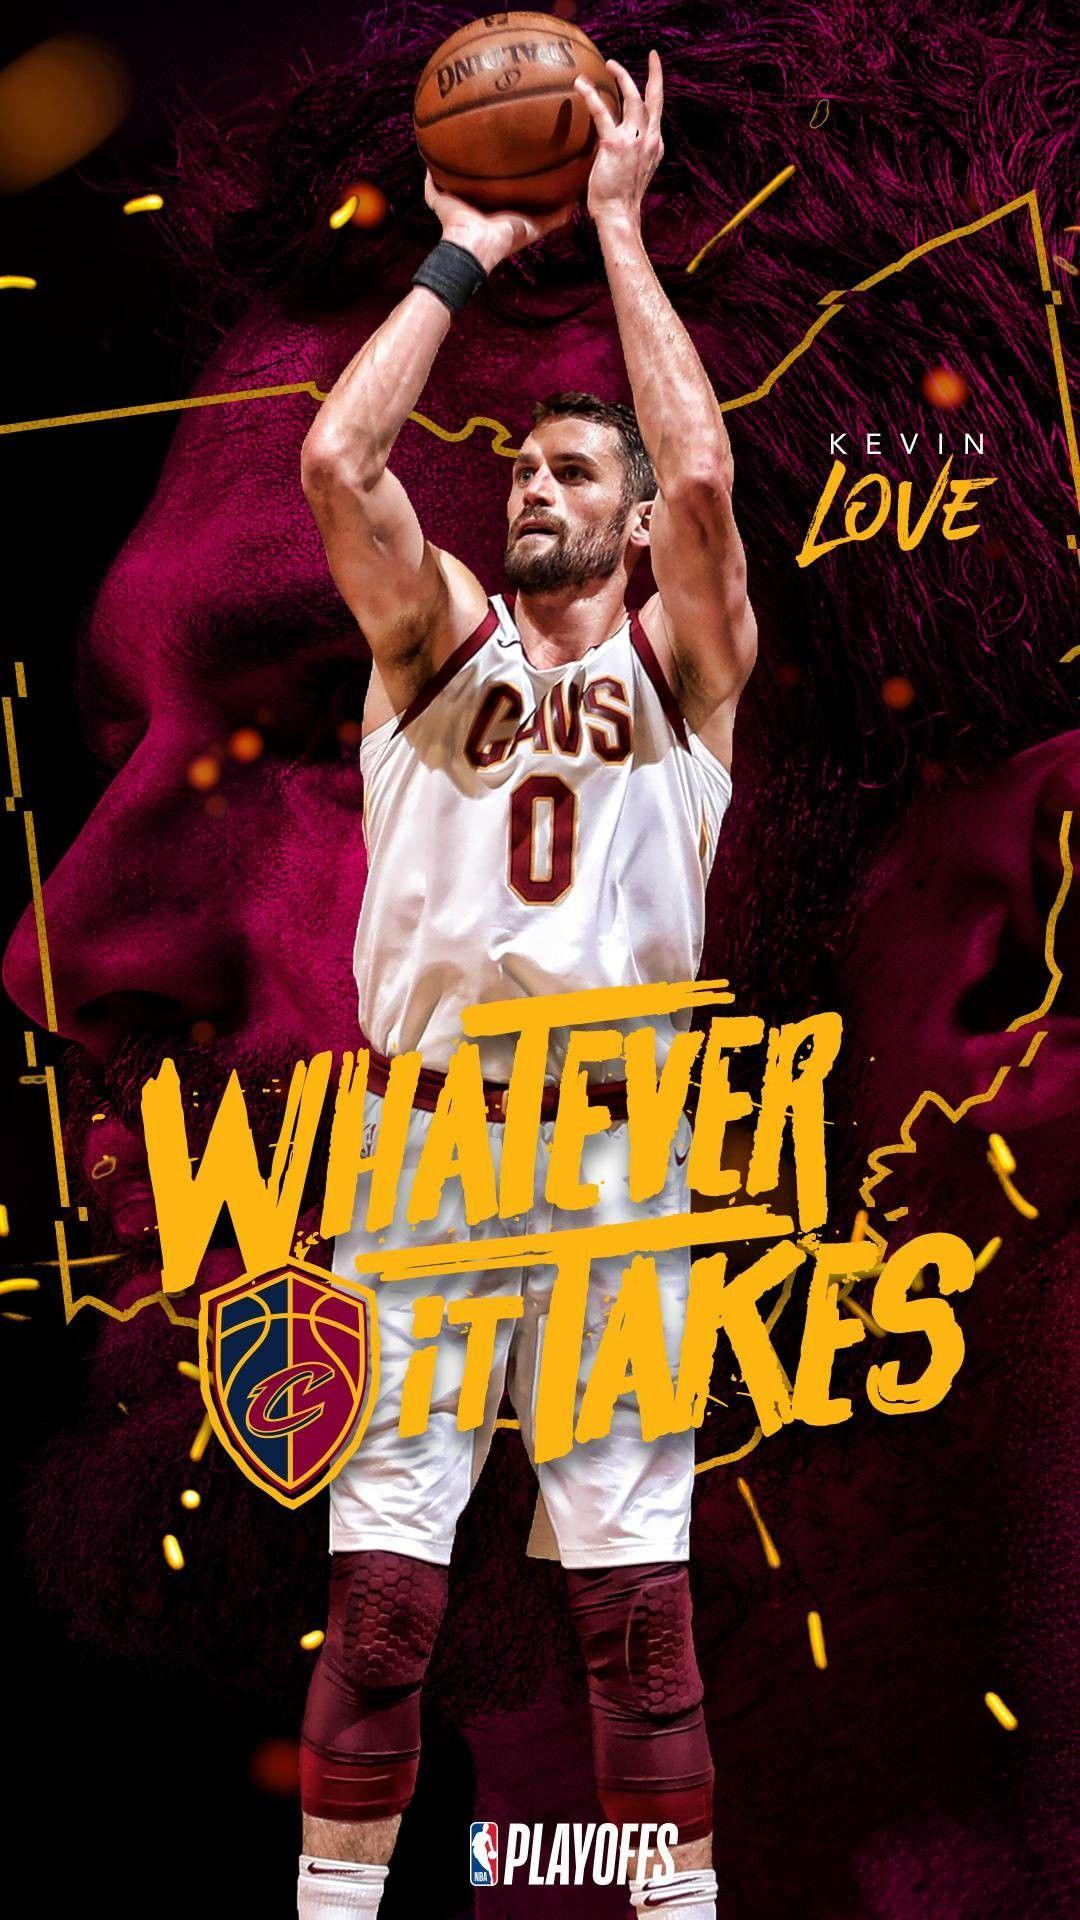 A great wallpapers of Kevin Love shooting a basket